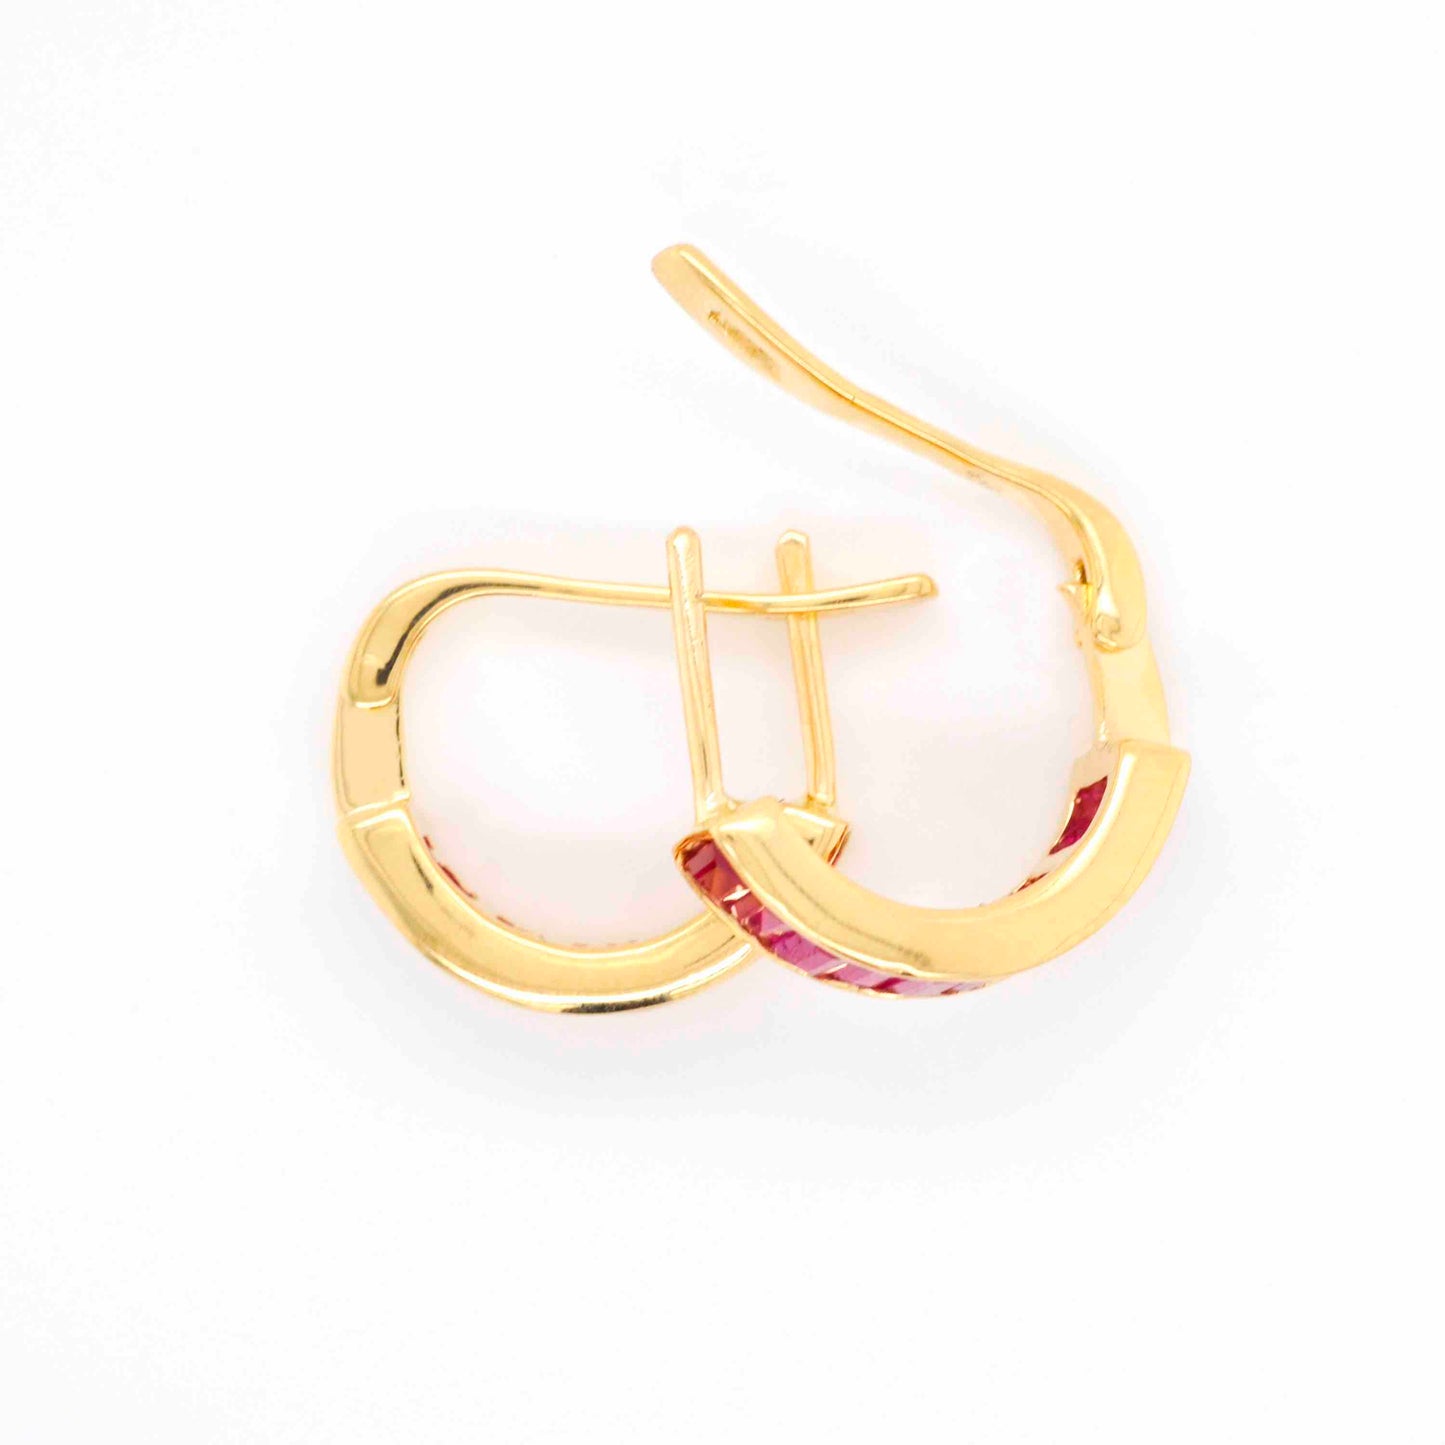 Chic and simple red stone hoops